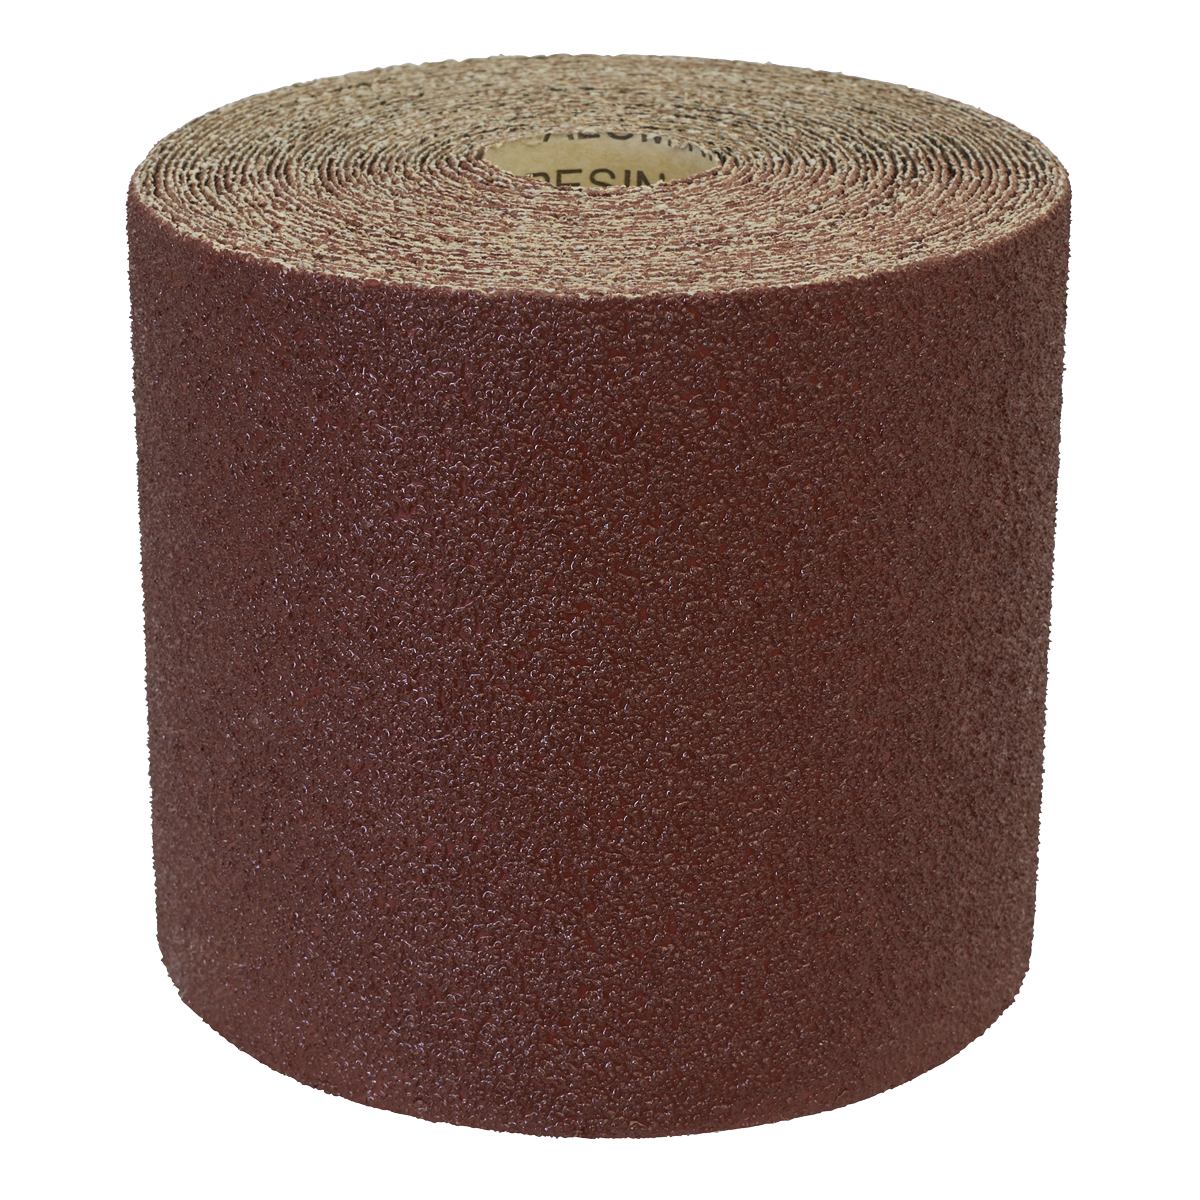 Production Sanding Roll 115mm x 10m - Very Coarse 40Grit - WSR1040 - Farming Parts